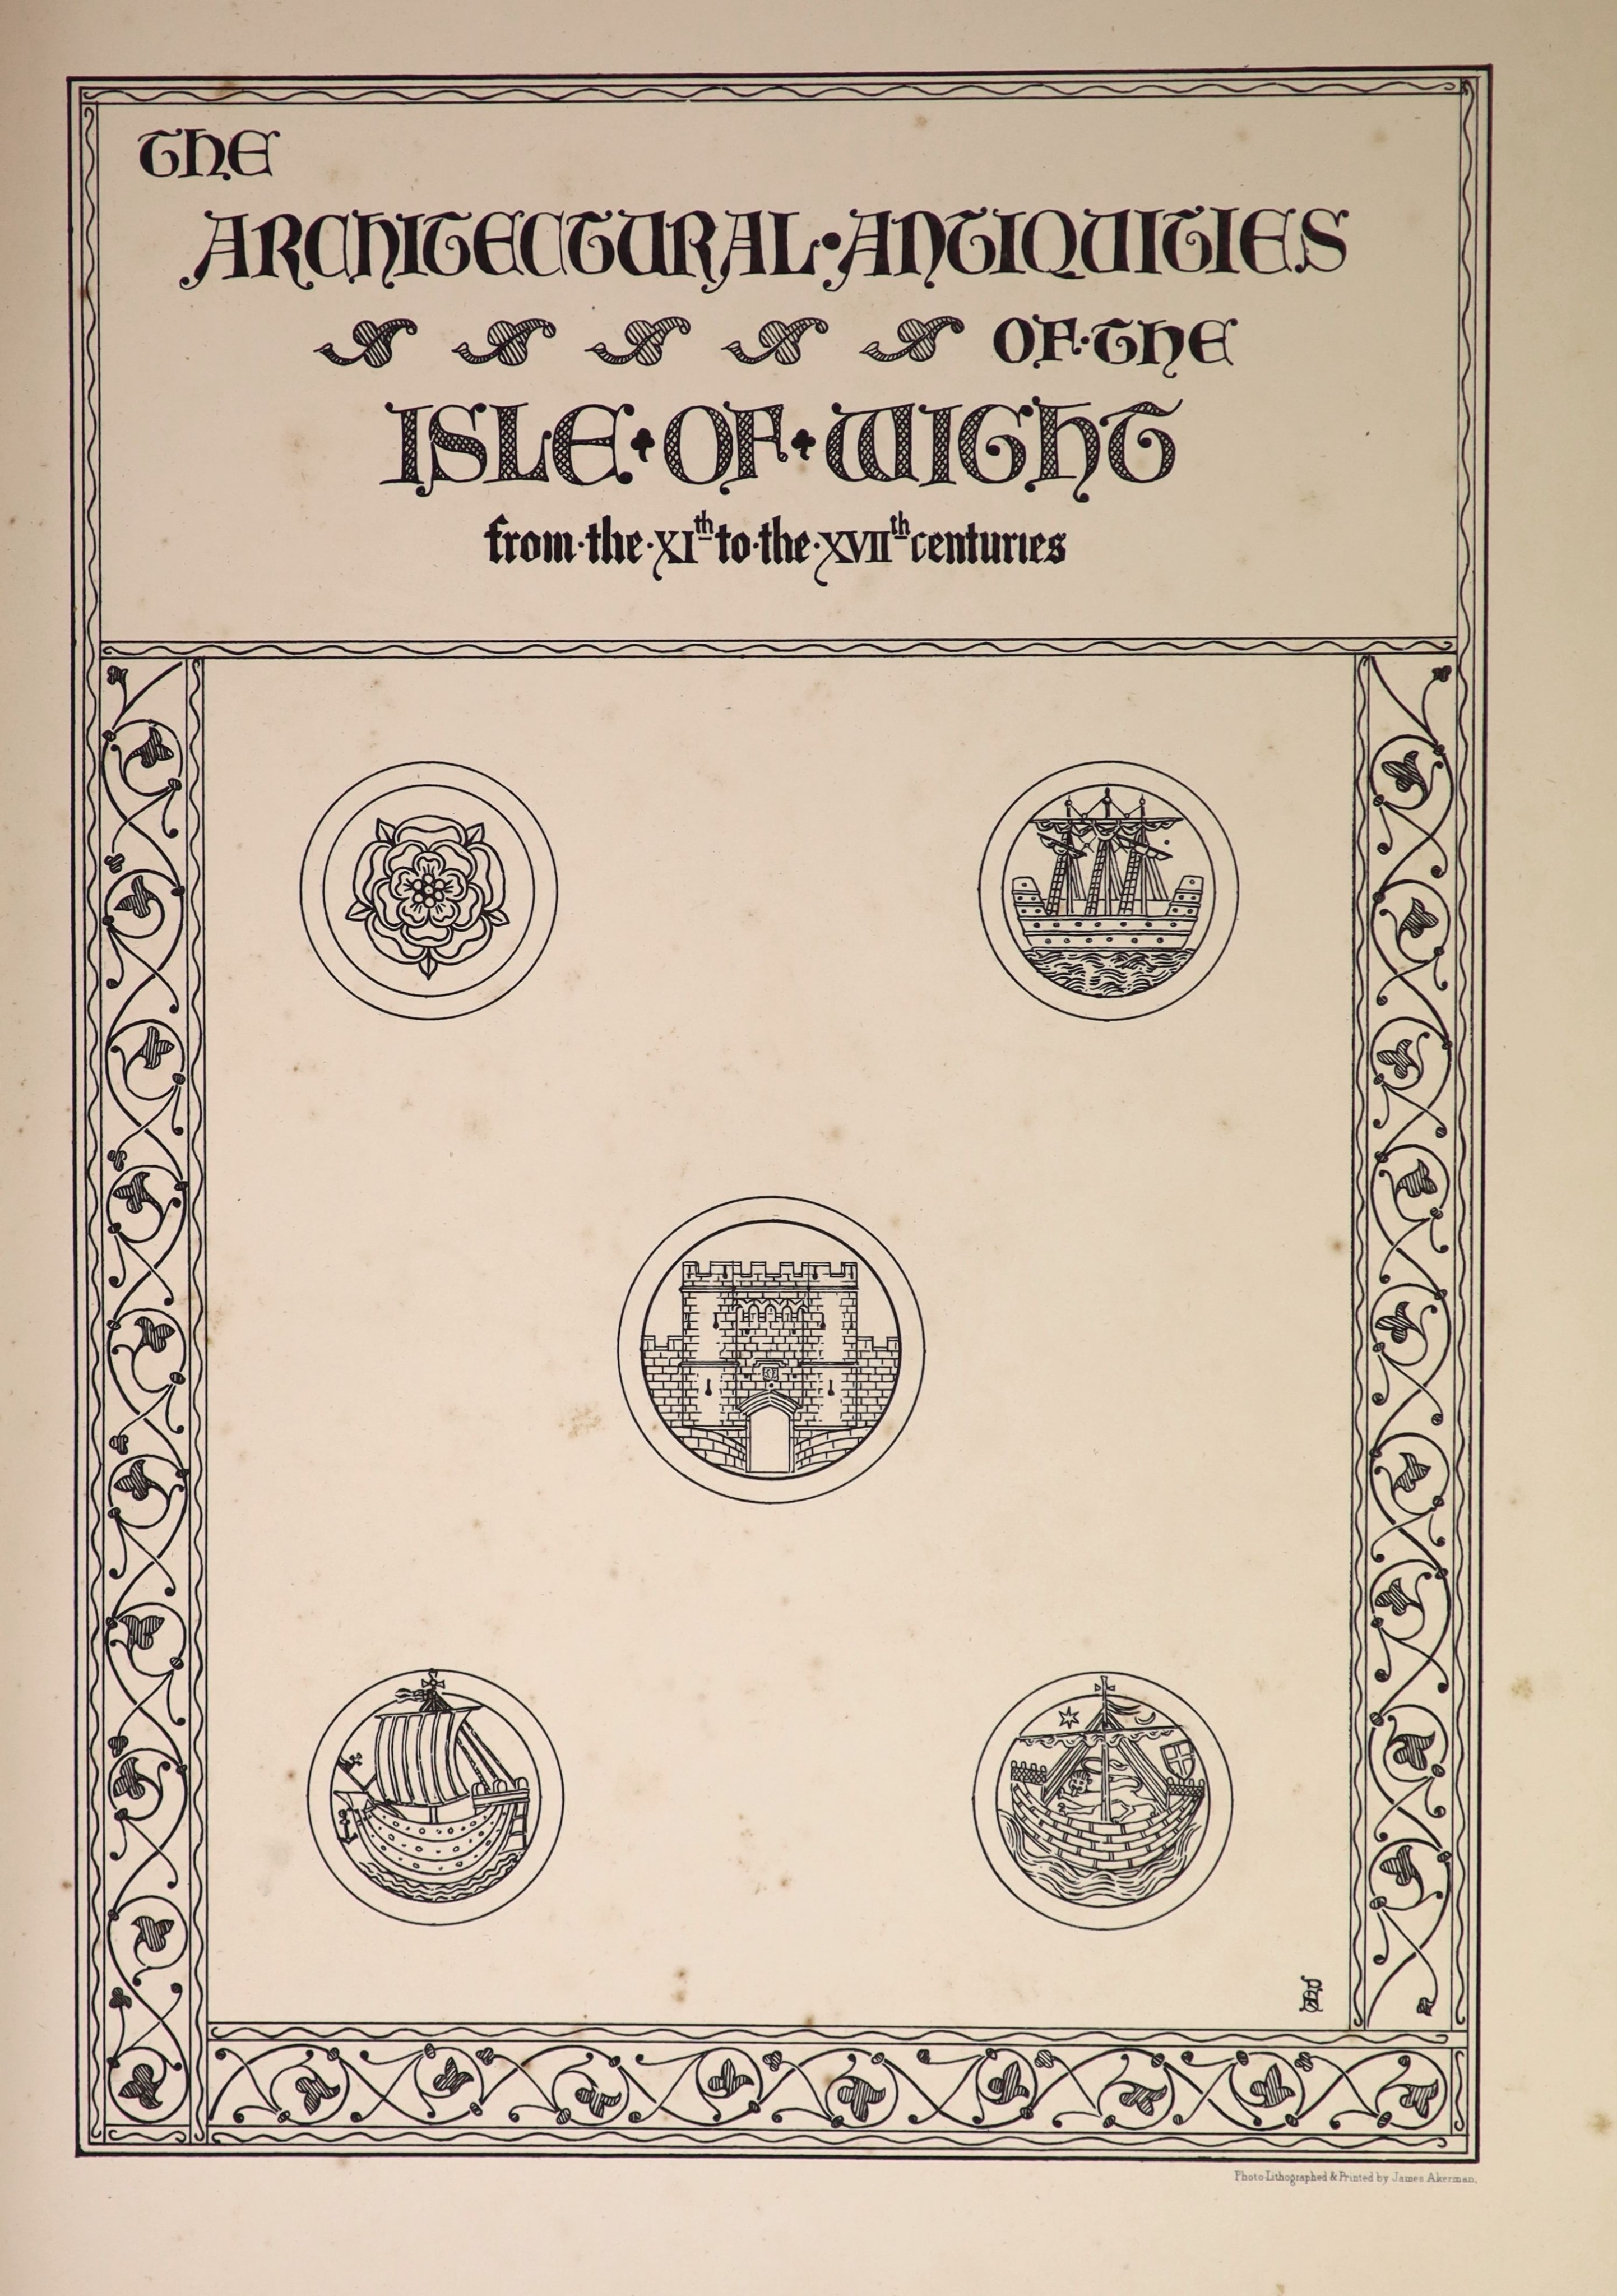 Stone, Percy Goddard. The Architectural Antiquities of the Isle of Wight from the XIth to the XVIIth Centuries Inclusive, 2 vols in 1, folio. Published by the Author,1891.